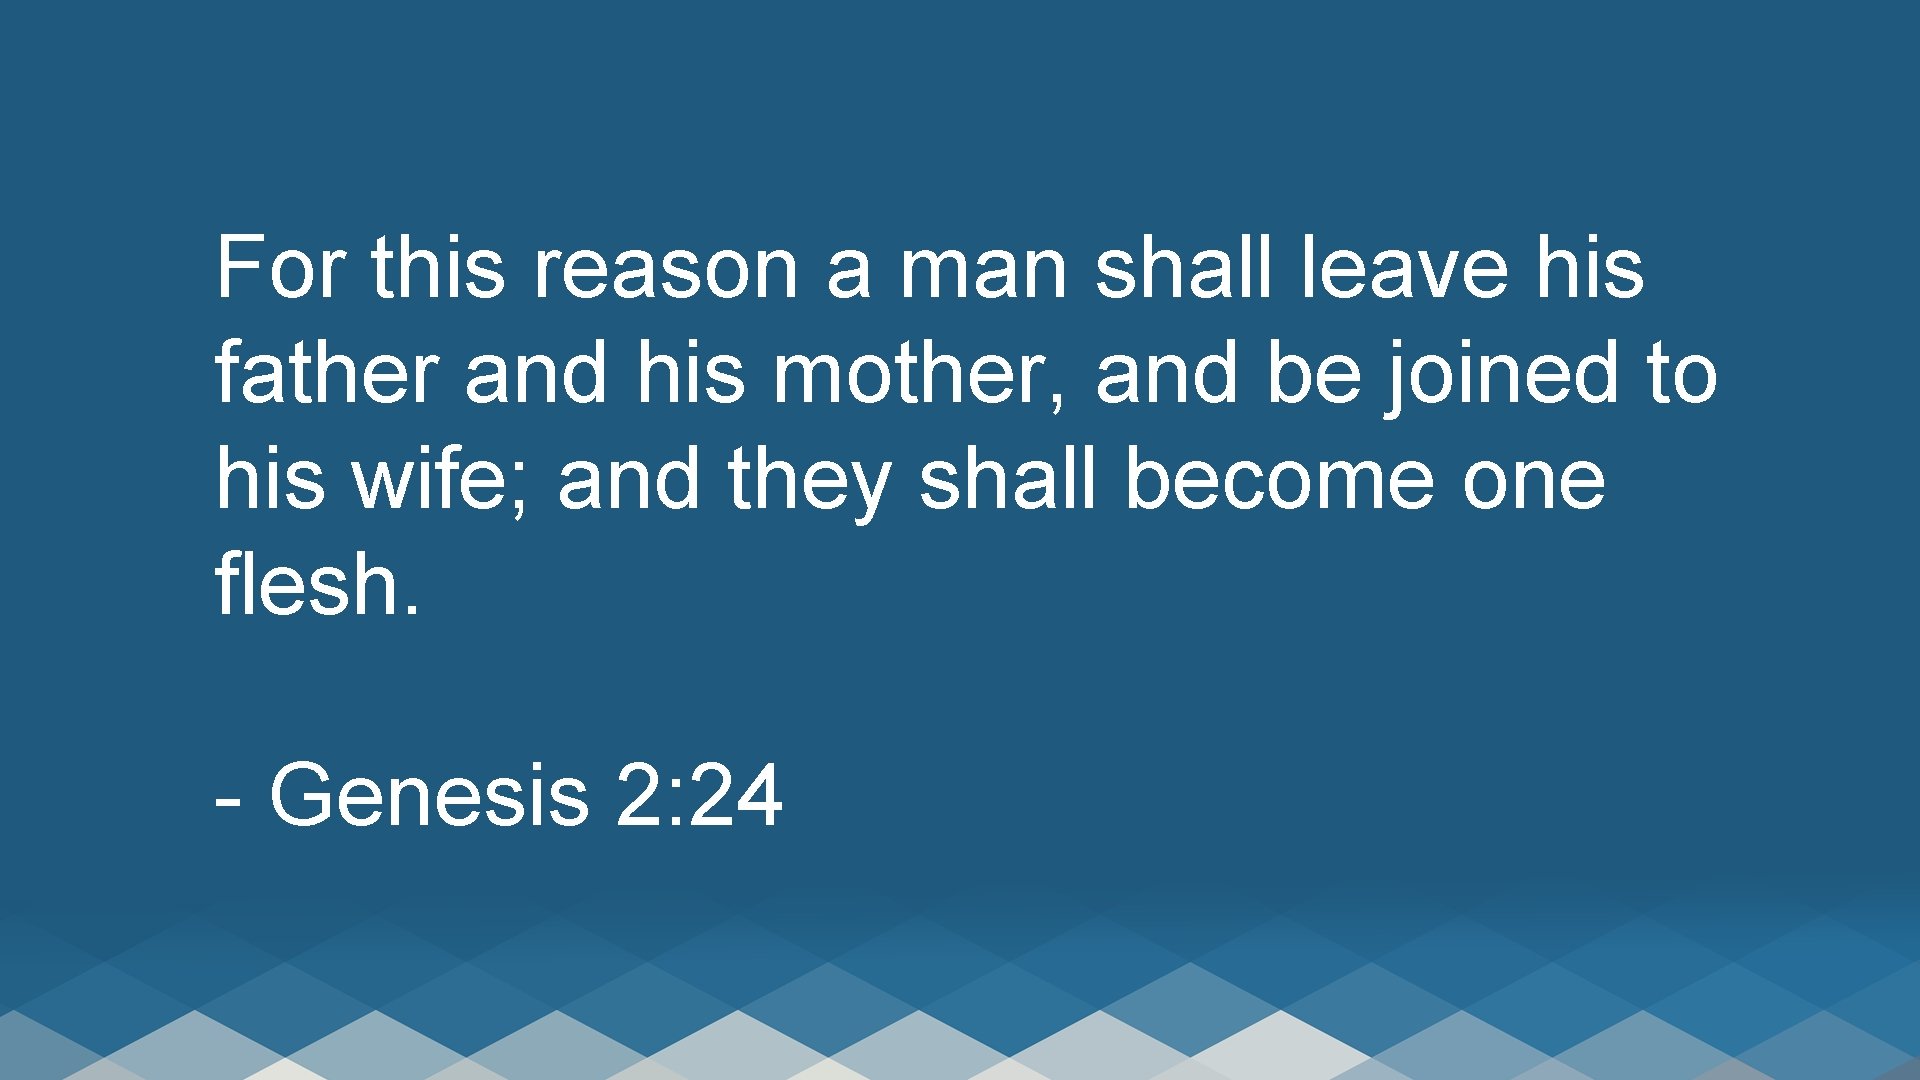 For this reason a man shall leave his father and his mother, and be